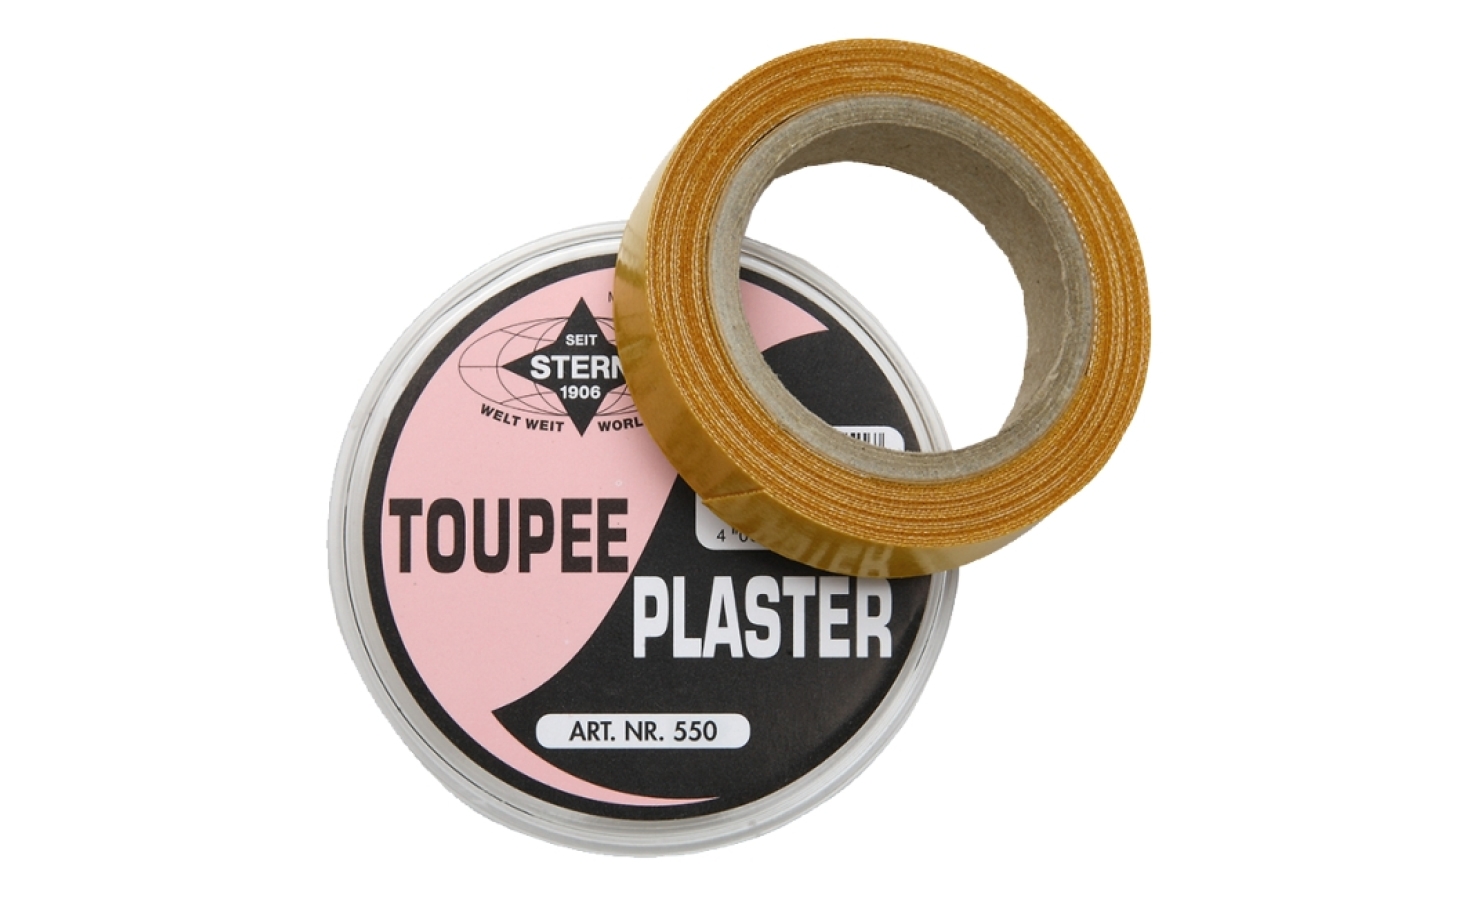 Stern Toupetpflaster 3480 200y